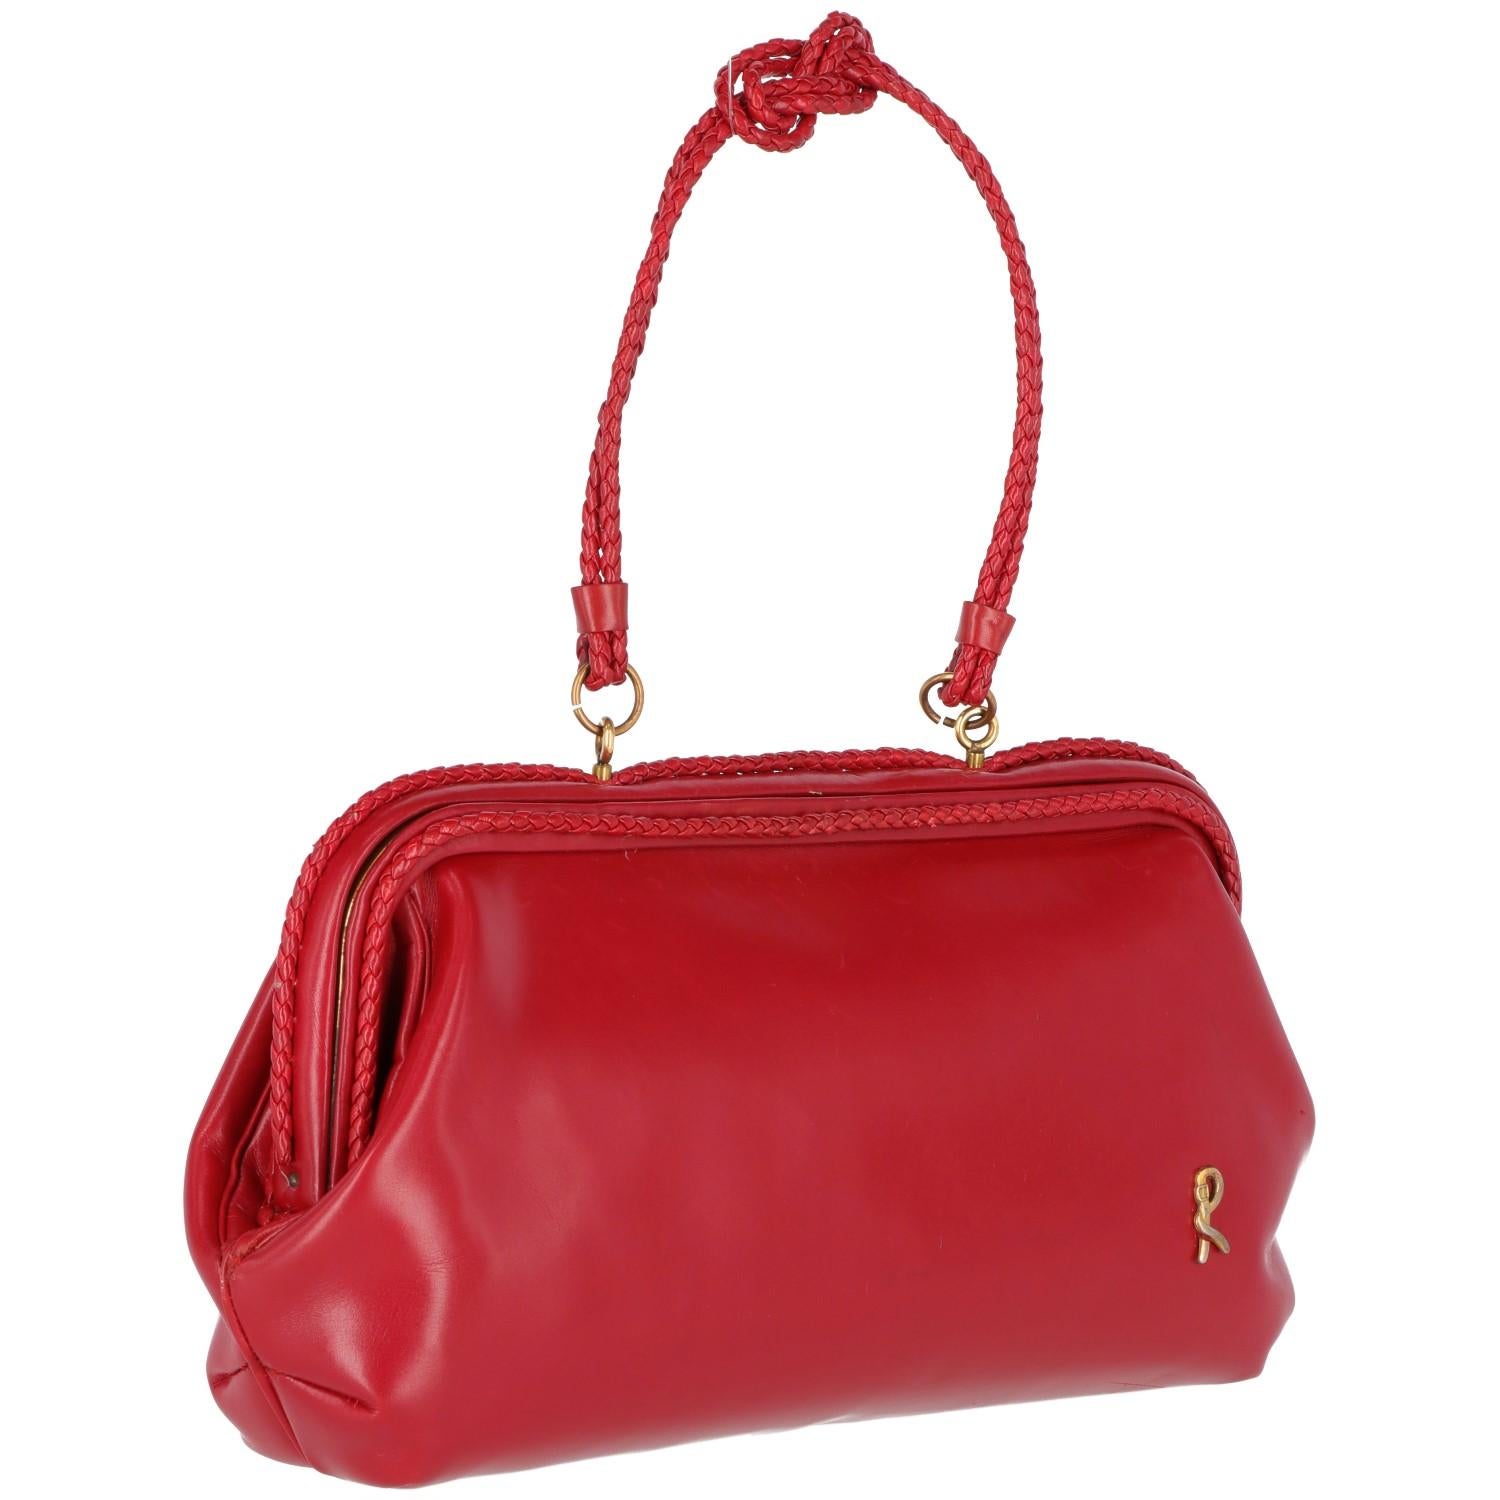 The Roberta di Camerino red leather bag is made in Italy and from 60s collection. 
With gold-tone metal closure, the red braided decorative leather is on the handle and on the bag edges. There are  a gold-tone logo on the front and three inner